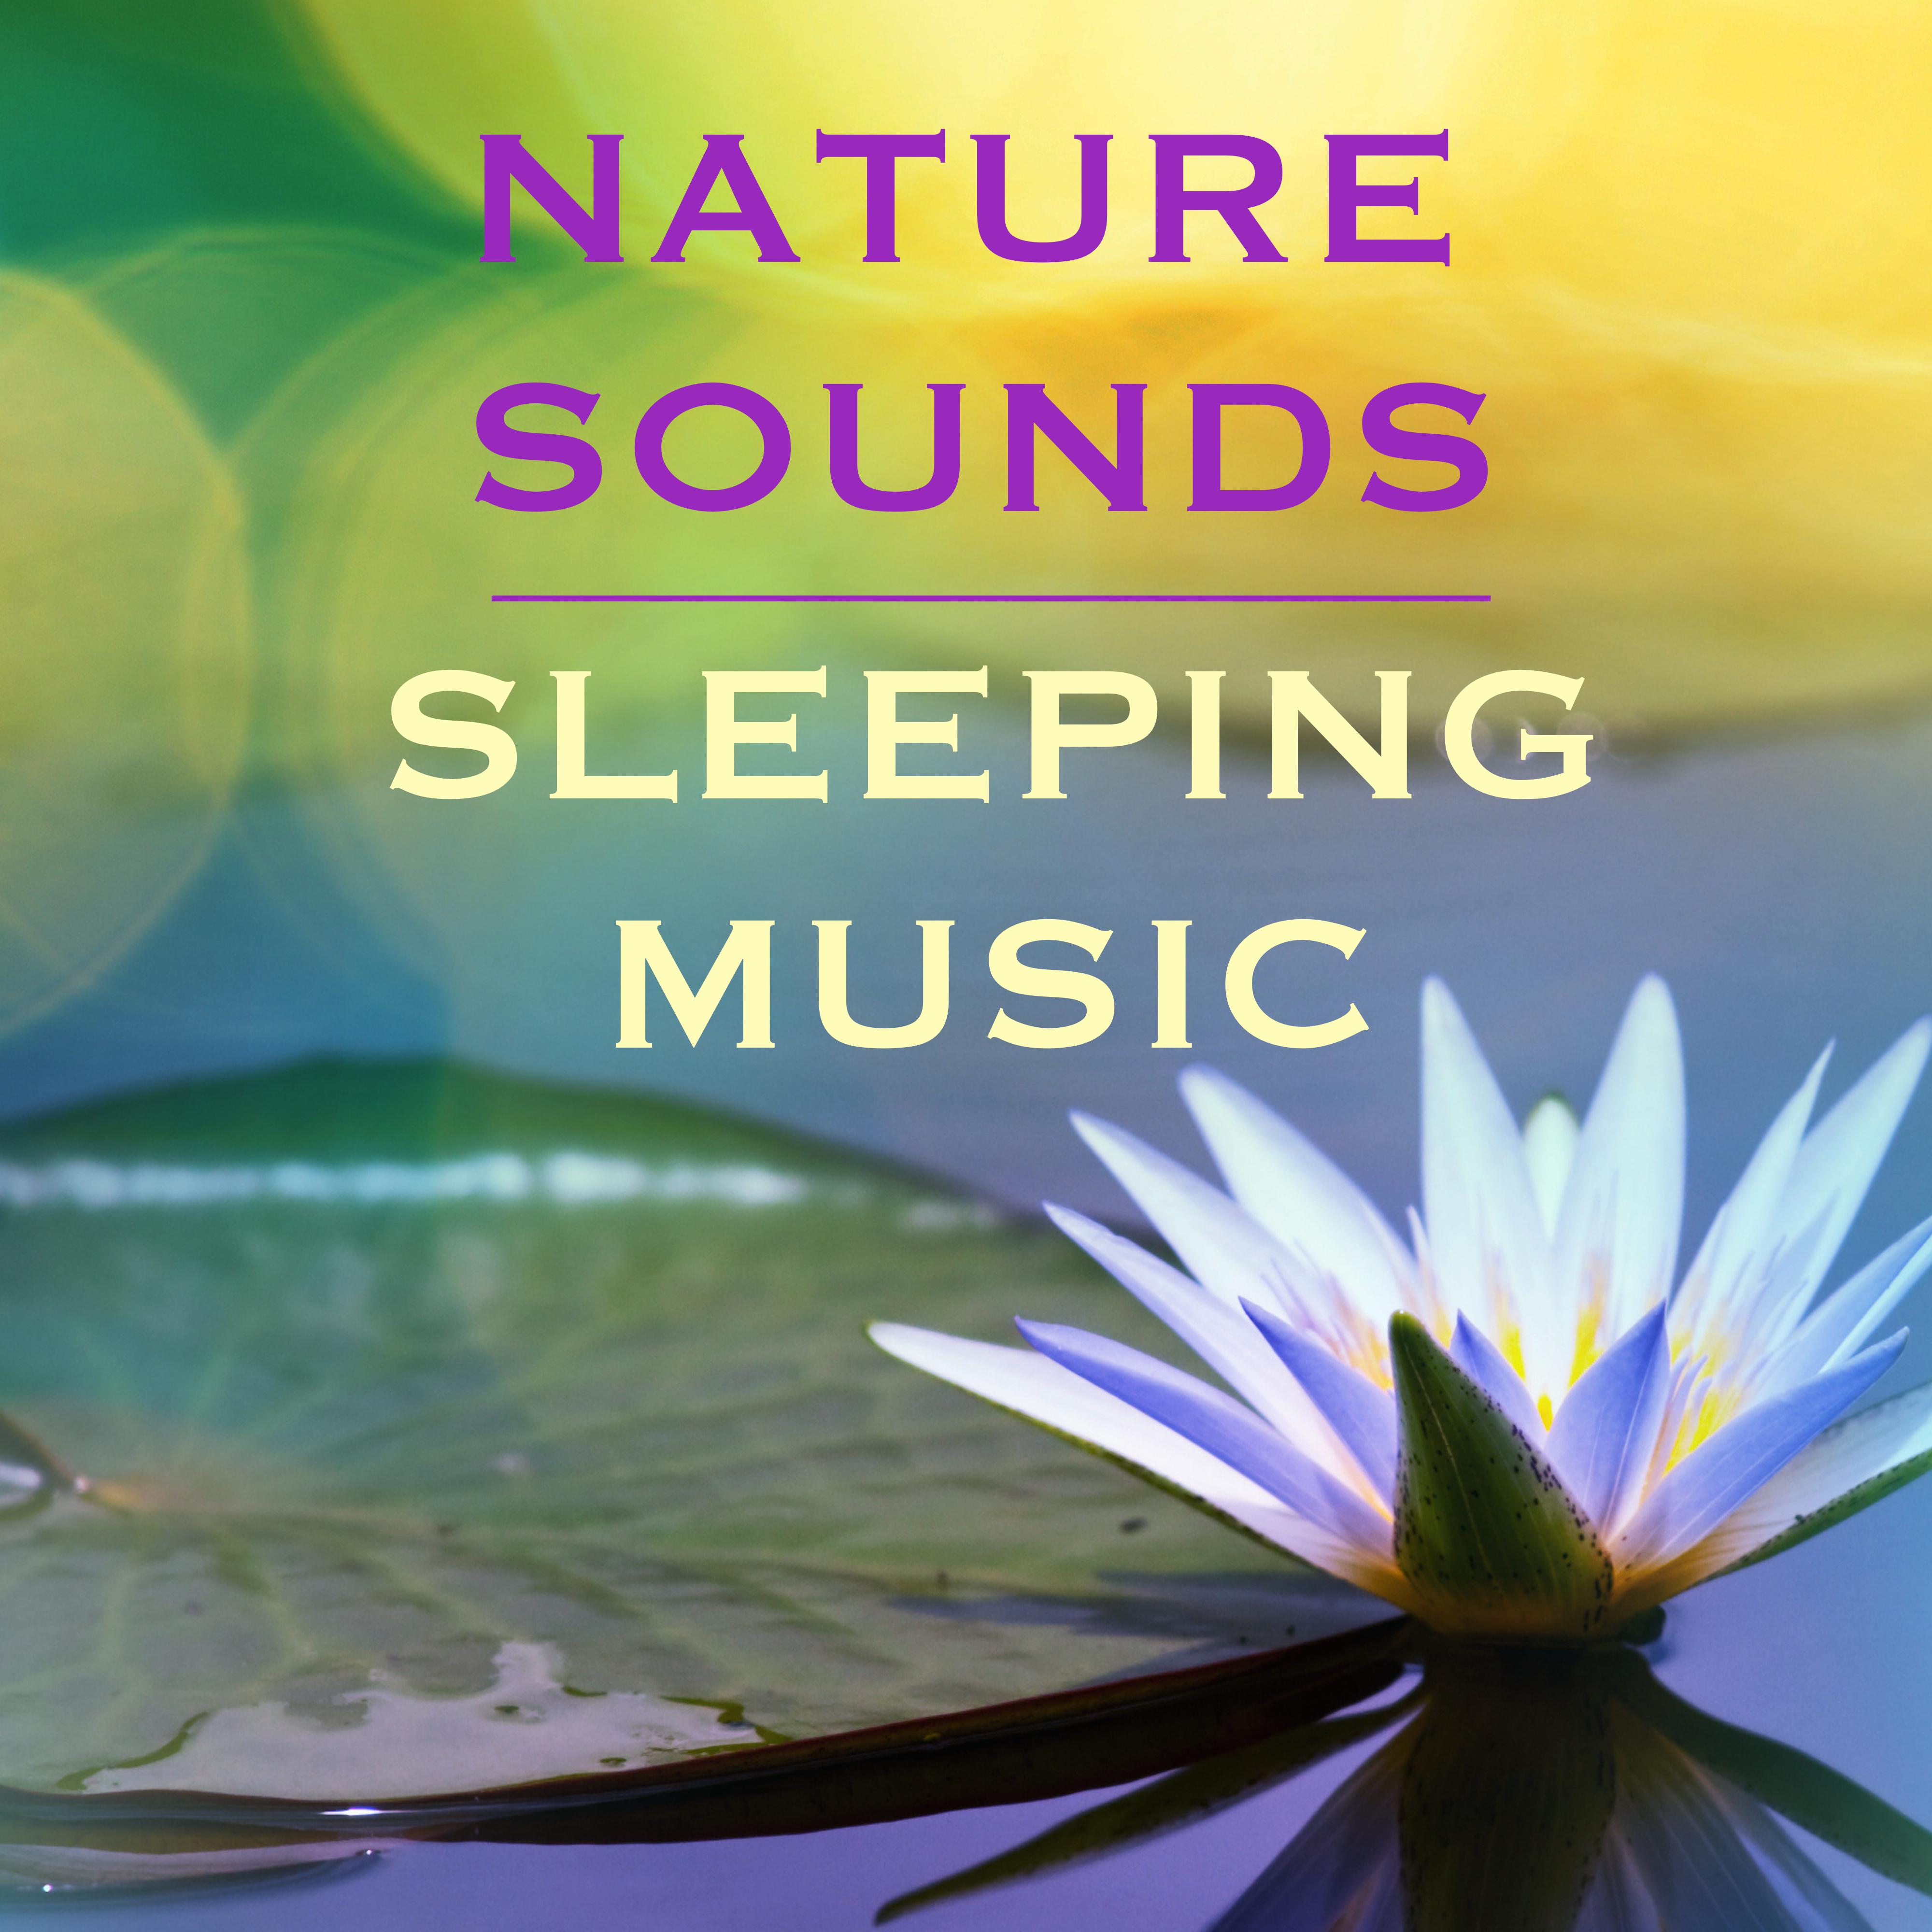 Nature Sounds  Sleeping Music: Water Sounds for Deep Meditation, Yoga Stress Relief and Sleep Soundly